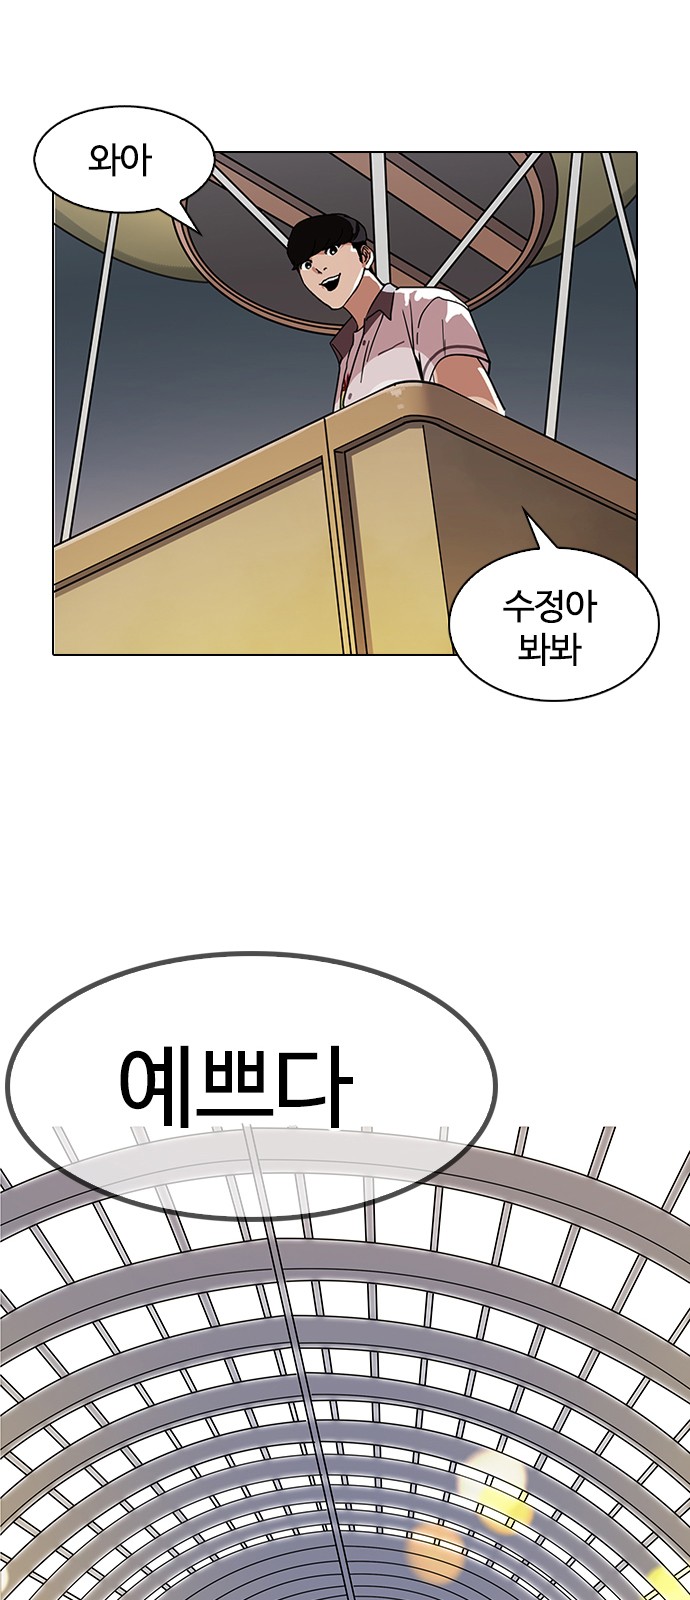 Lookism - Chapter 142 - Page 1